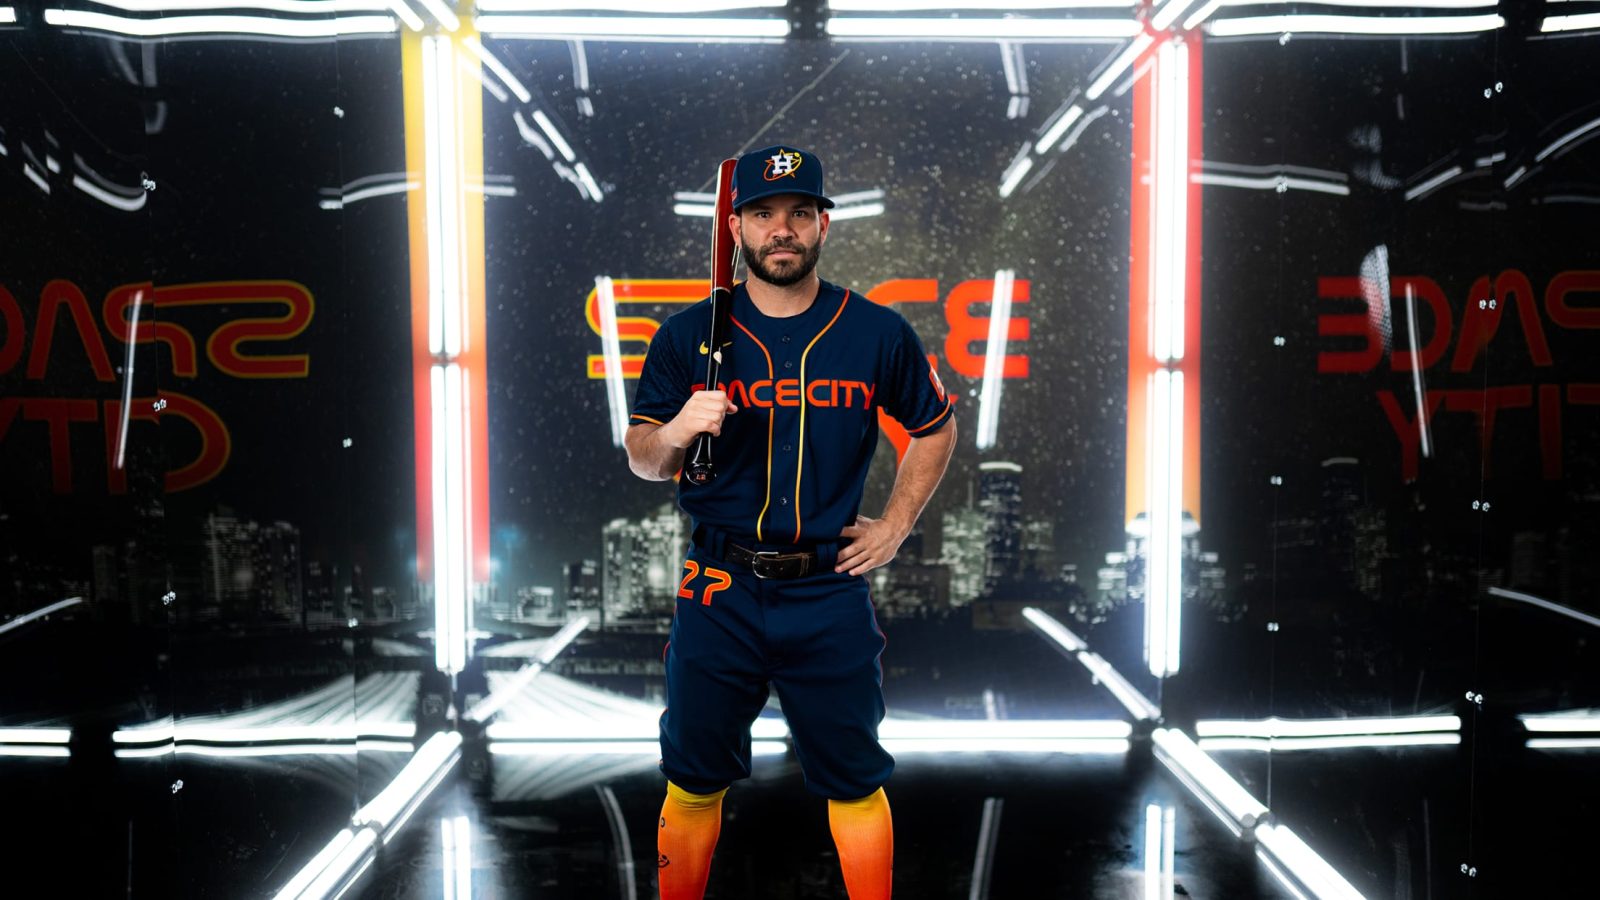 A look at the Houston Astros' new space themed jerseys